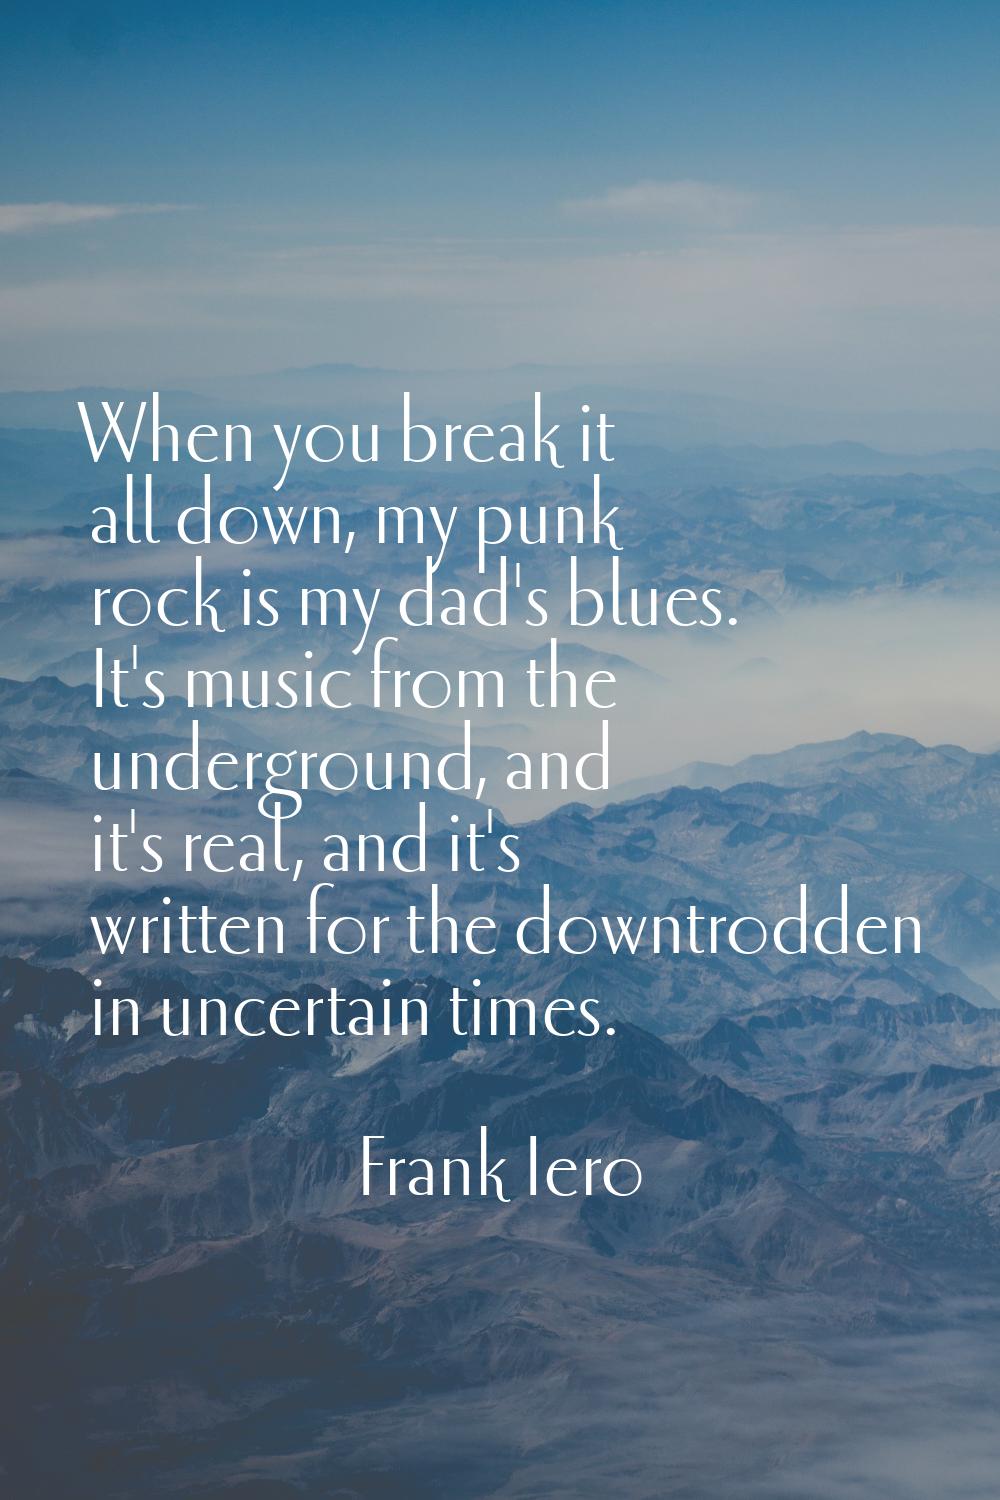 When you break it all down, my punk rock is my dad's blues. It's music from the underground, and it